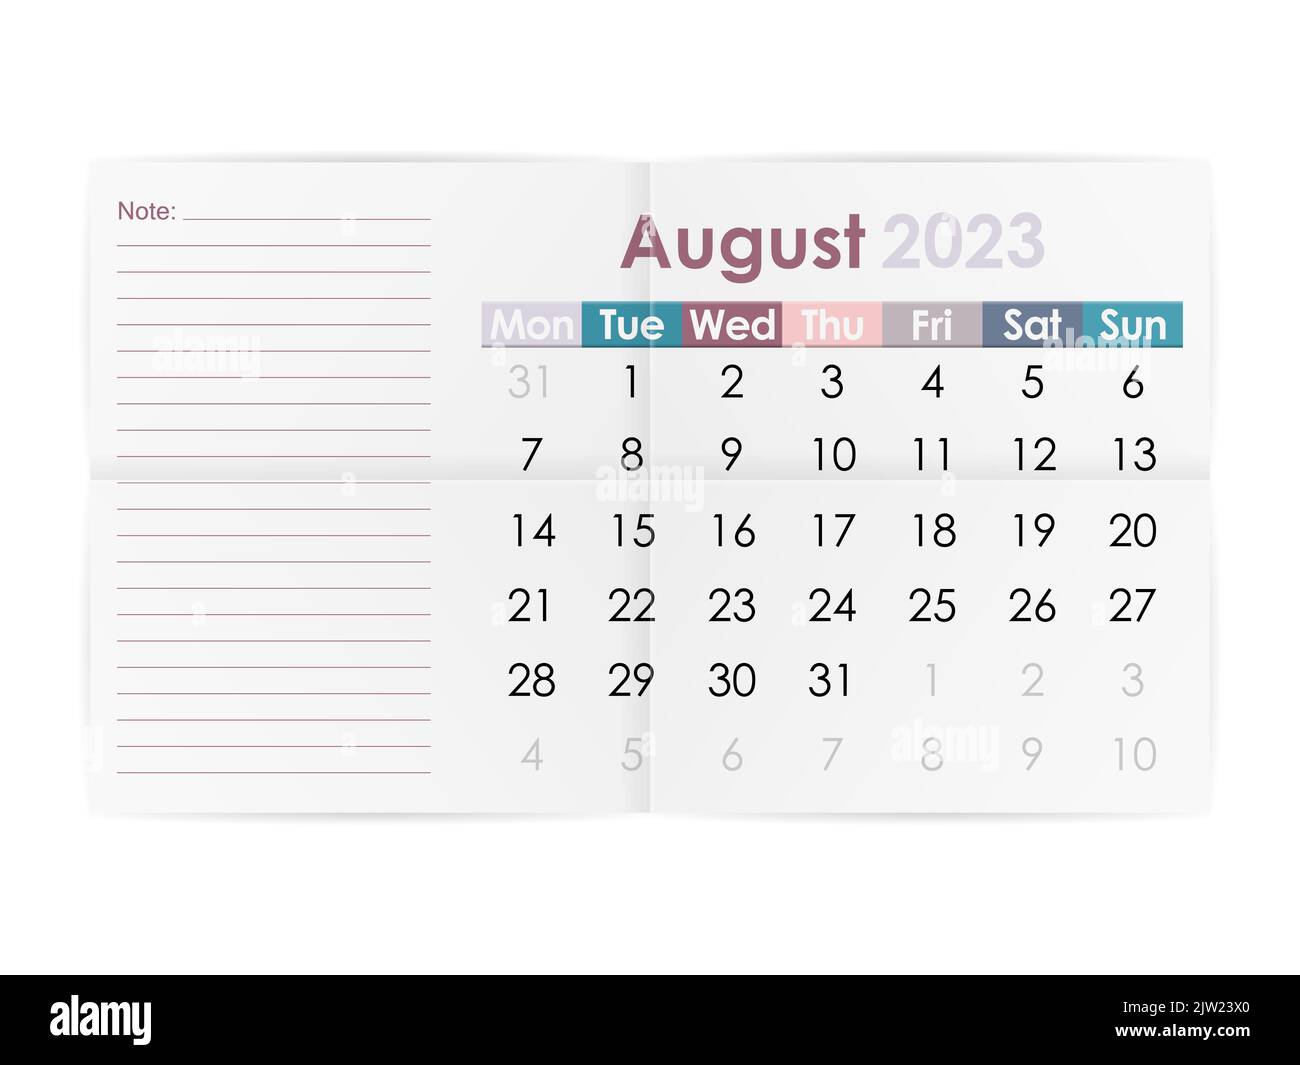 Calendar August 2023 on a white background. Vector illustration. Stock Photo